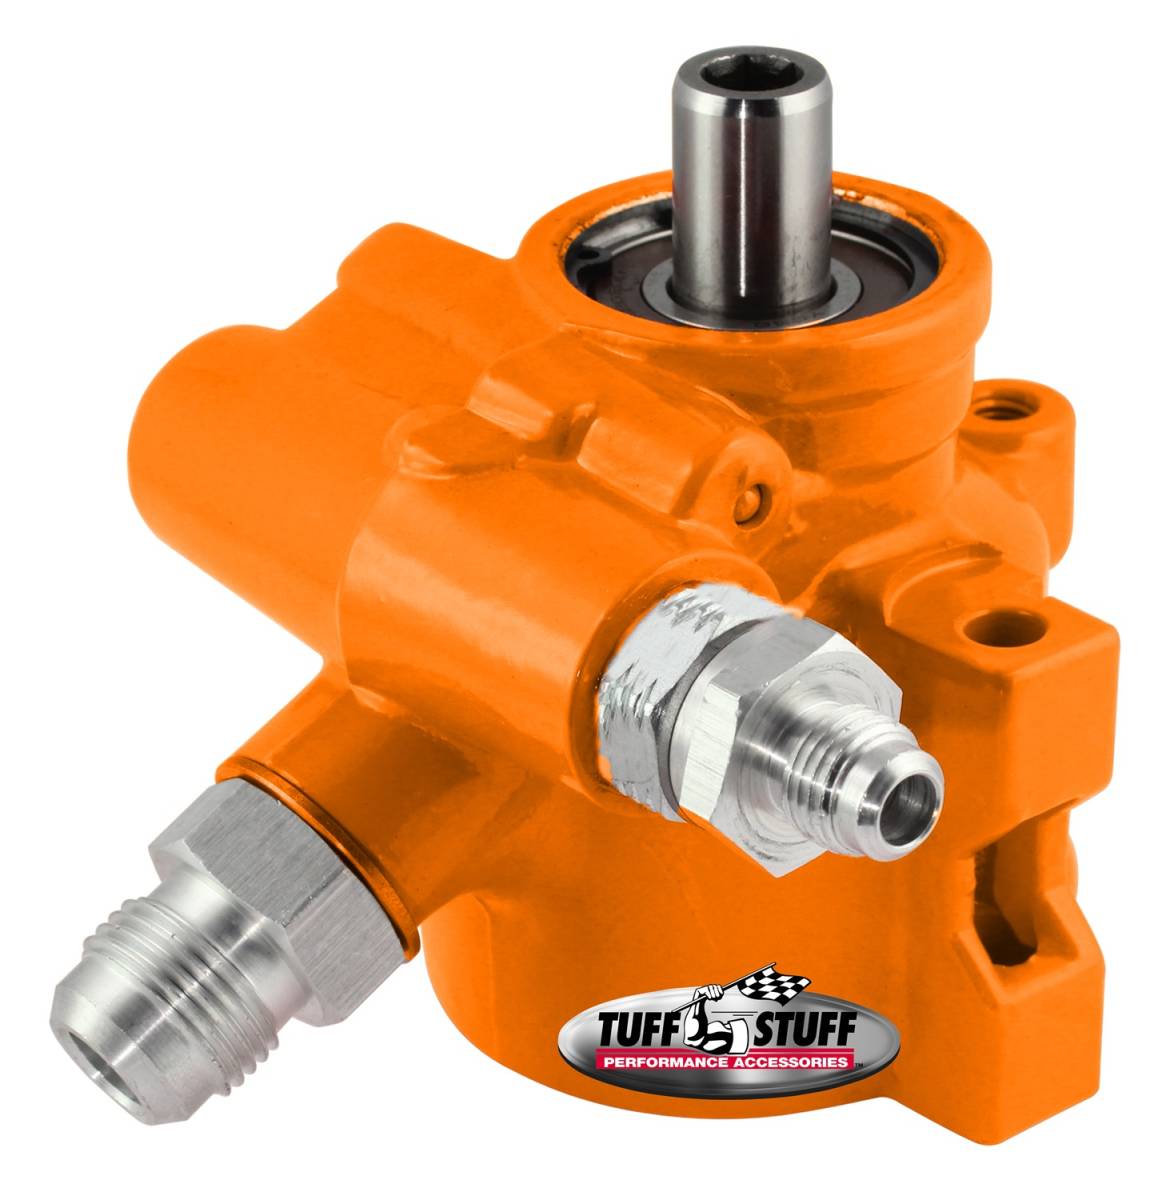 Tuff Stuff Performance - Type II Alum. Power Steering Pump AN-6 And AN-10 Fittings 8mm Through Hole Mounting Aluminum For Street Rods/Custom Vehicles w/Limited Engine Space Orange 6175ALORANGE